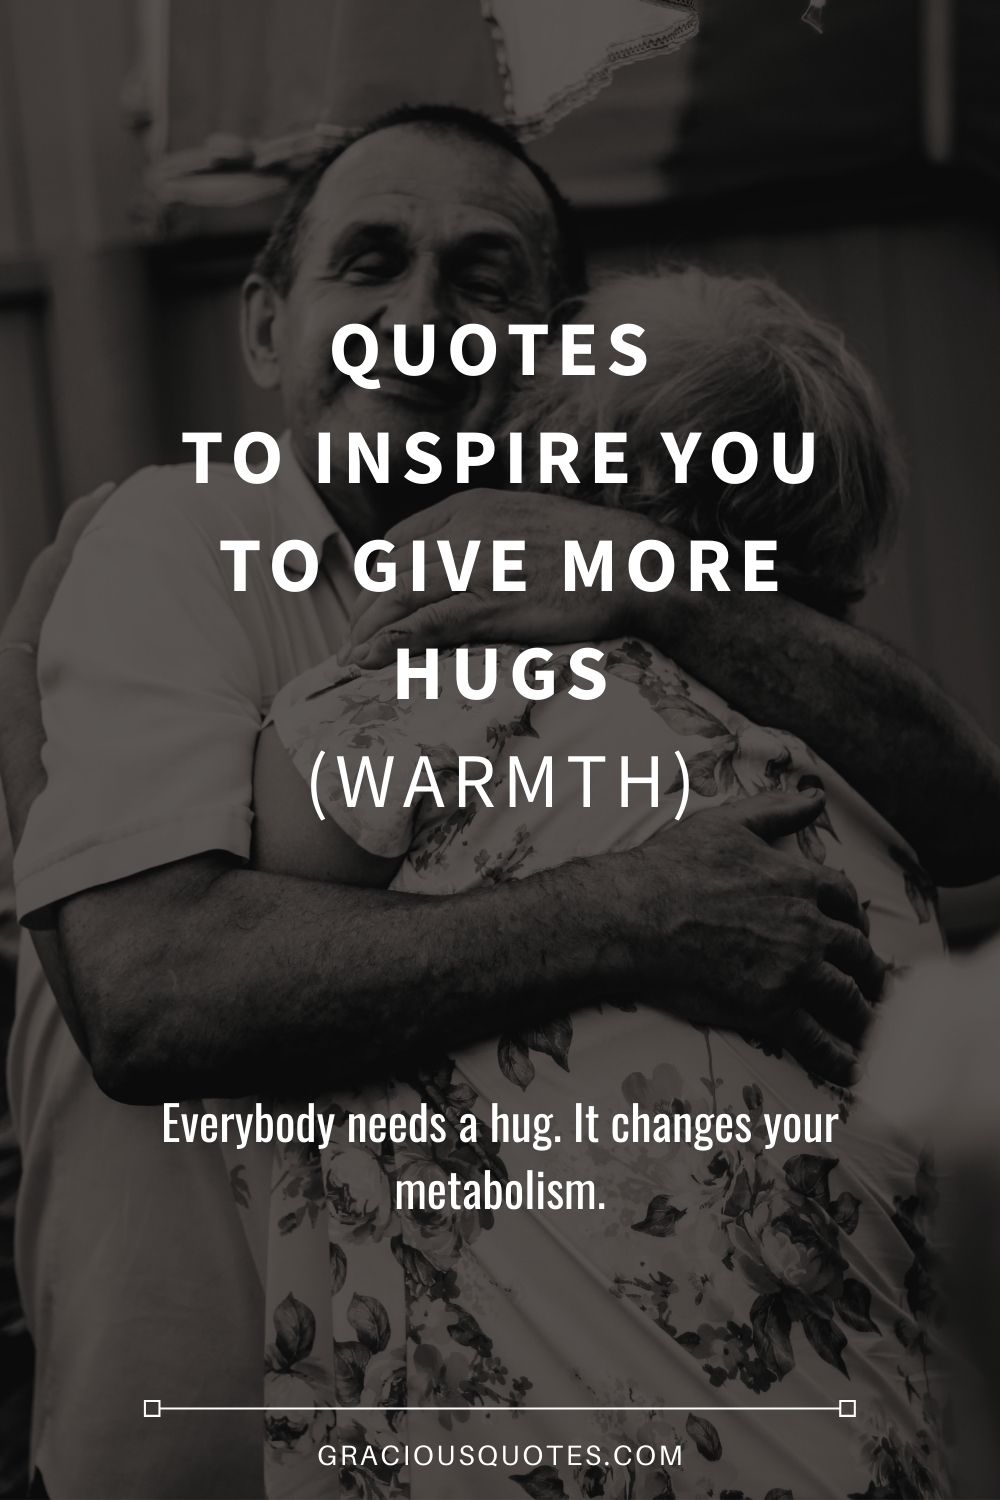 60 Quotes to Inspire You to Give More Hugs (WARMTH)